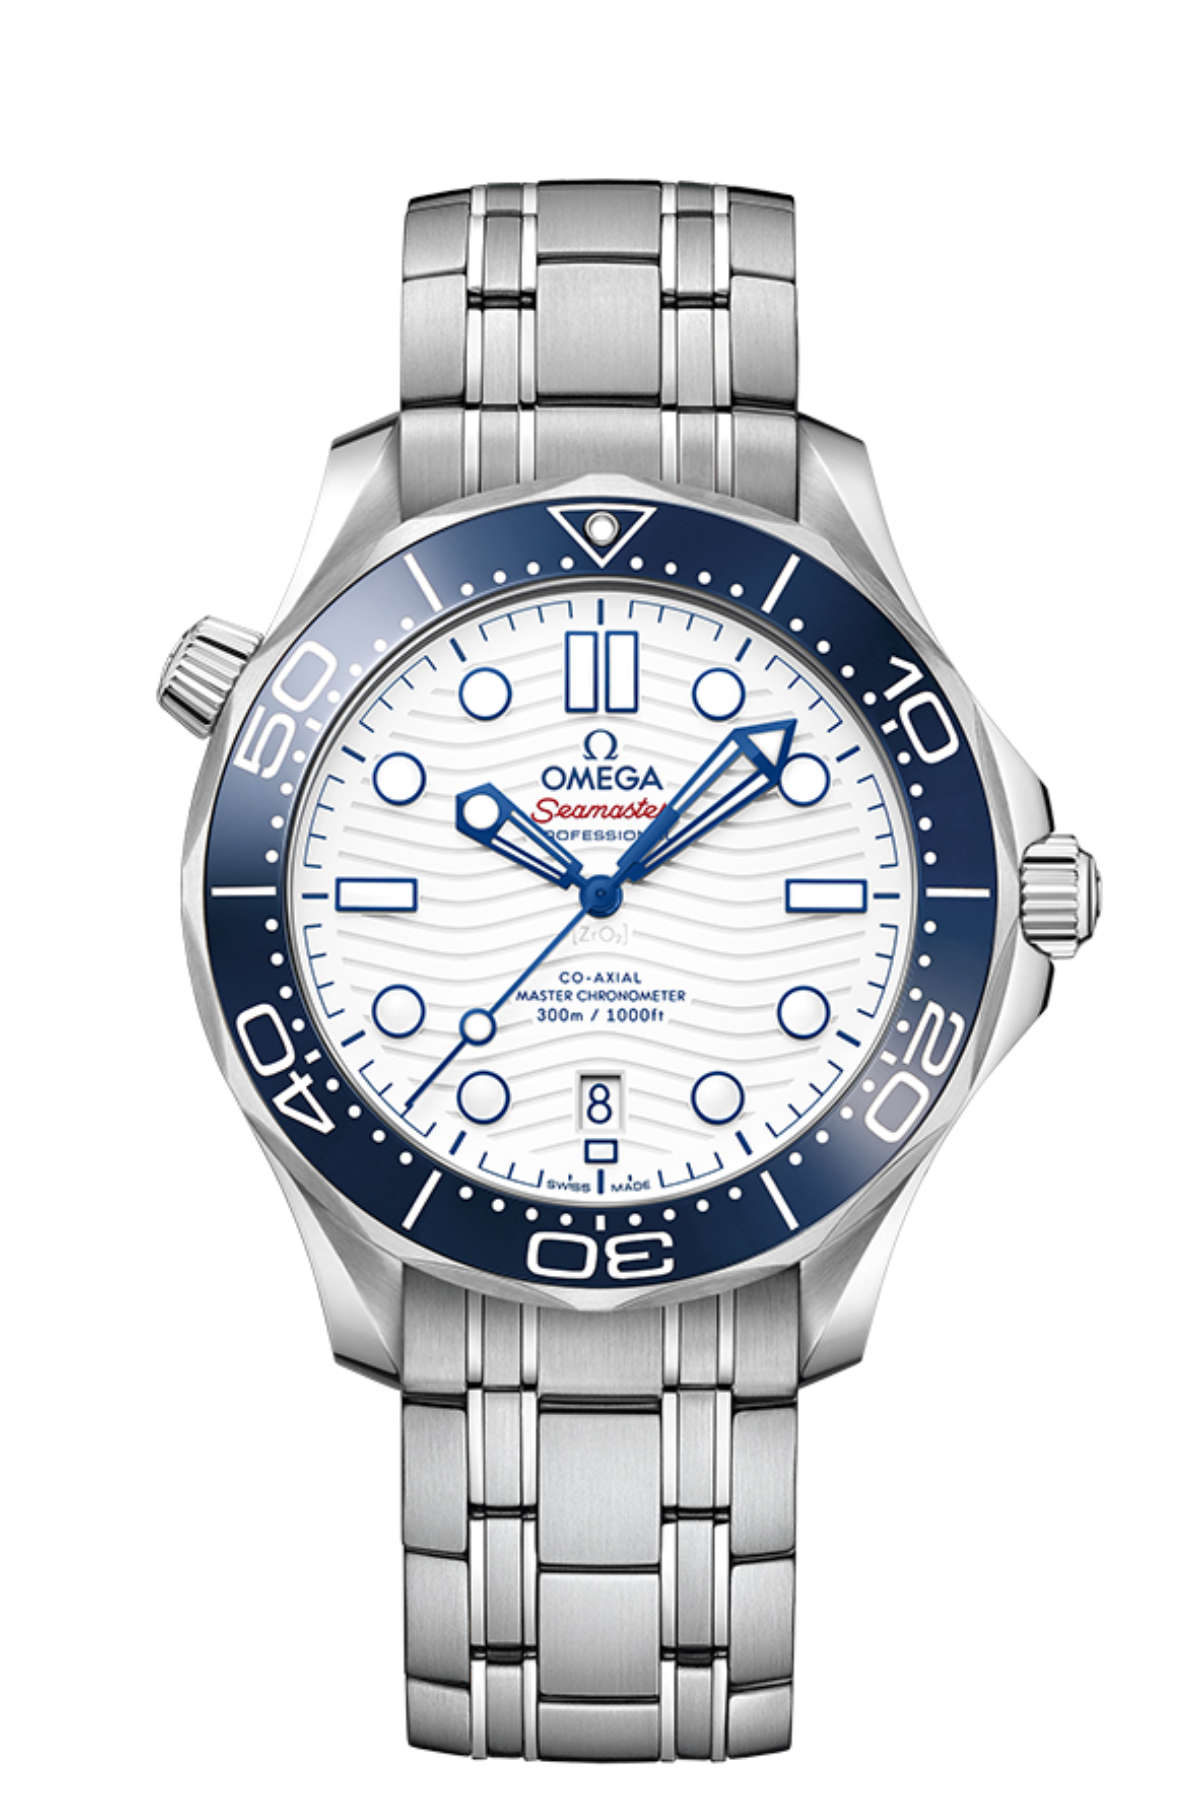 100 Days To Tokyo! - OMEGA Counts Down To The Olympic Games With The Seamaster Diver 300M Tokyo 2020